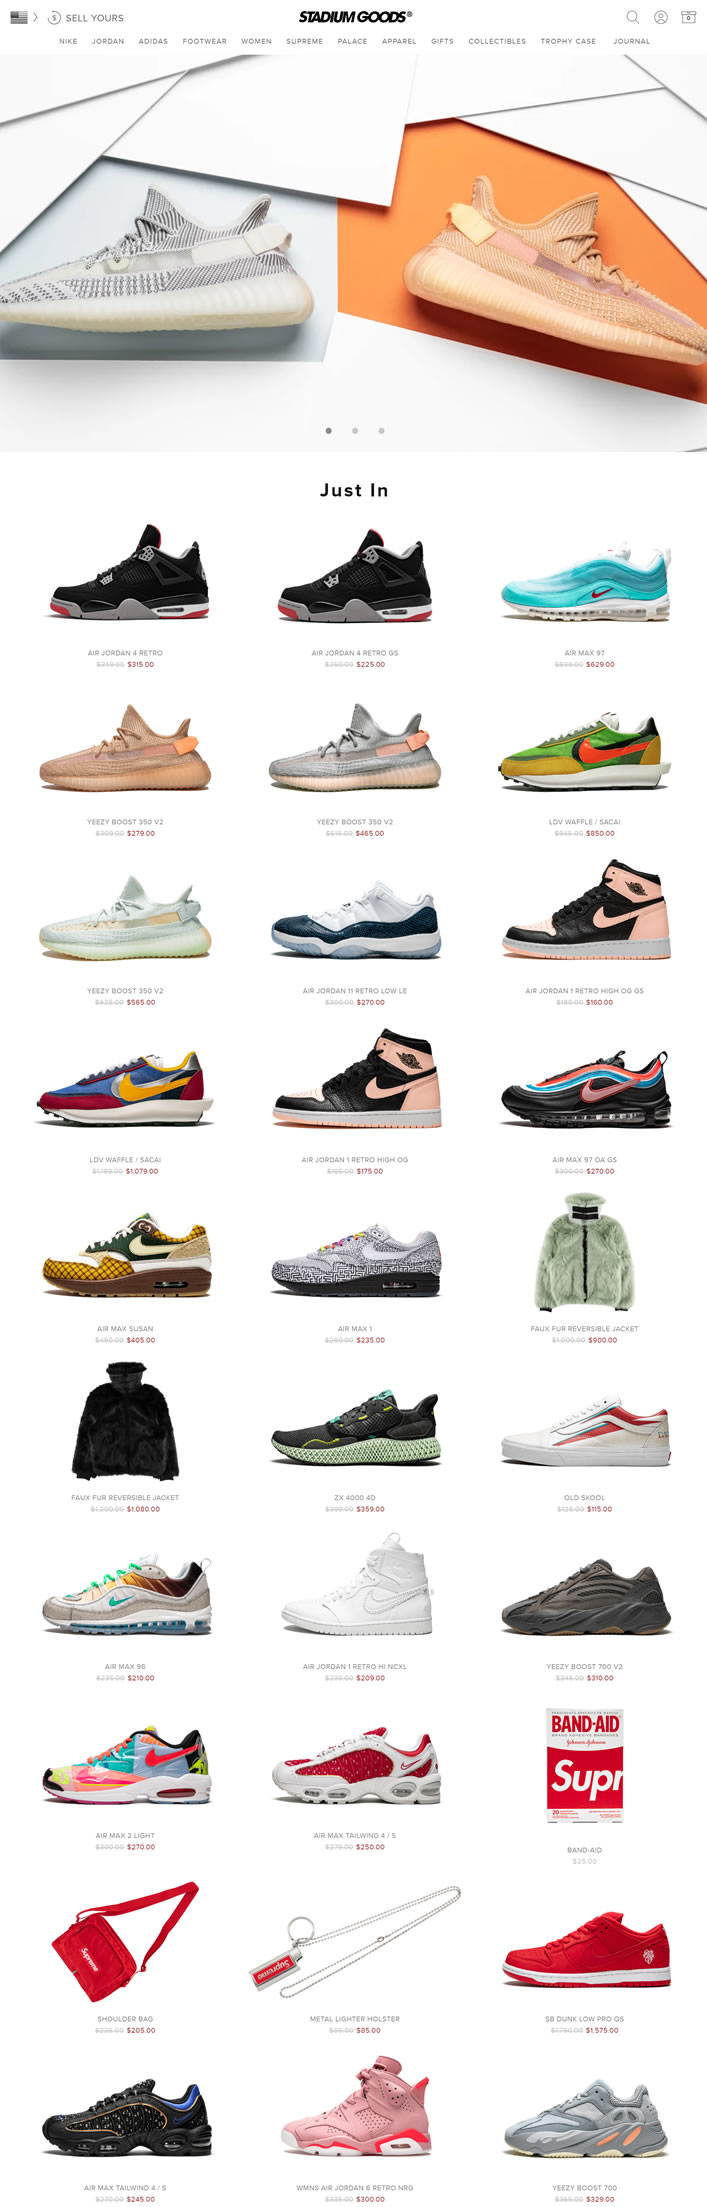 Stadium Goods Official Site: Air Jordan, Nike, adidas, Supreme & Other Footwear Available